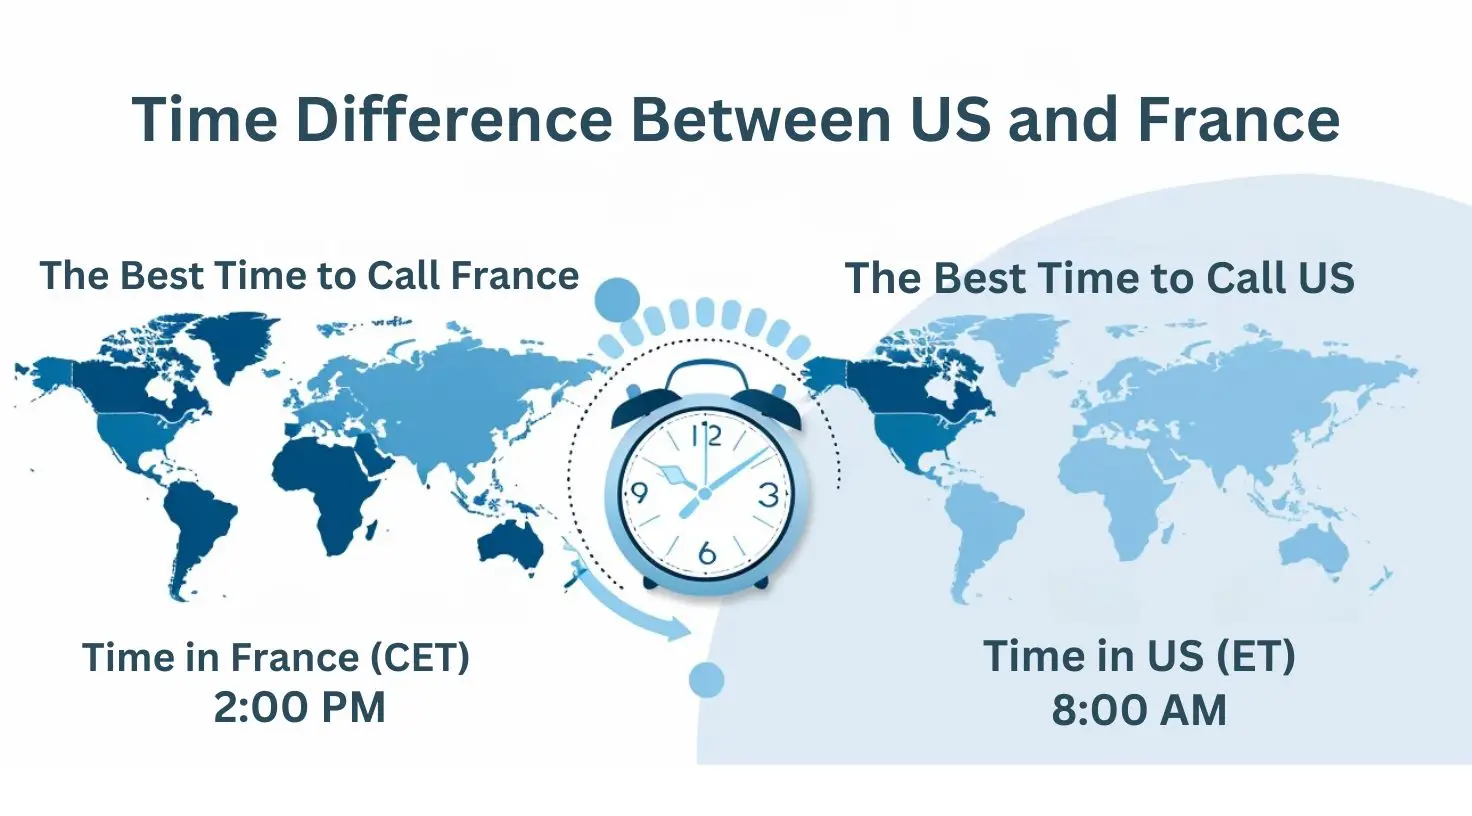 The Best Time to Call France